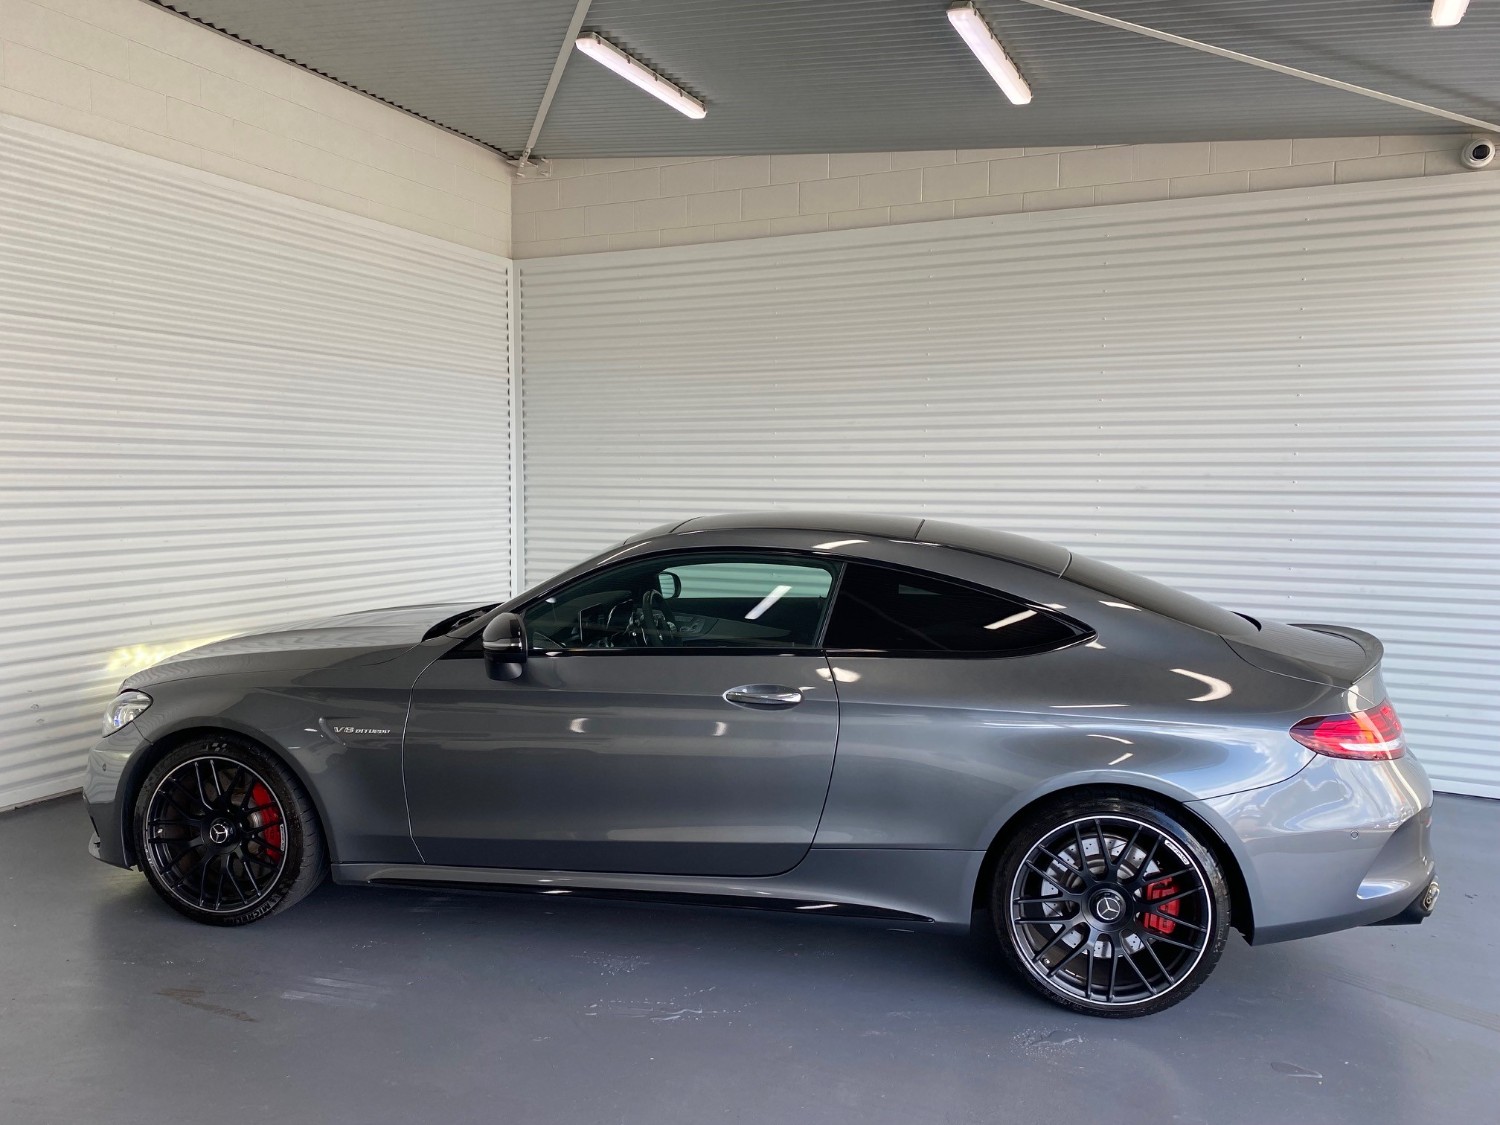 2019 MY09 Mercedes-Benz C-class C205 809MY C63 AMG Coupe Image 13